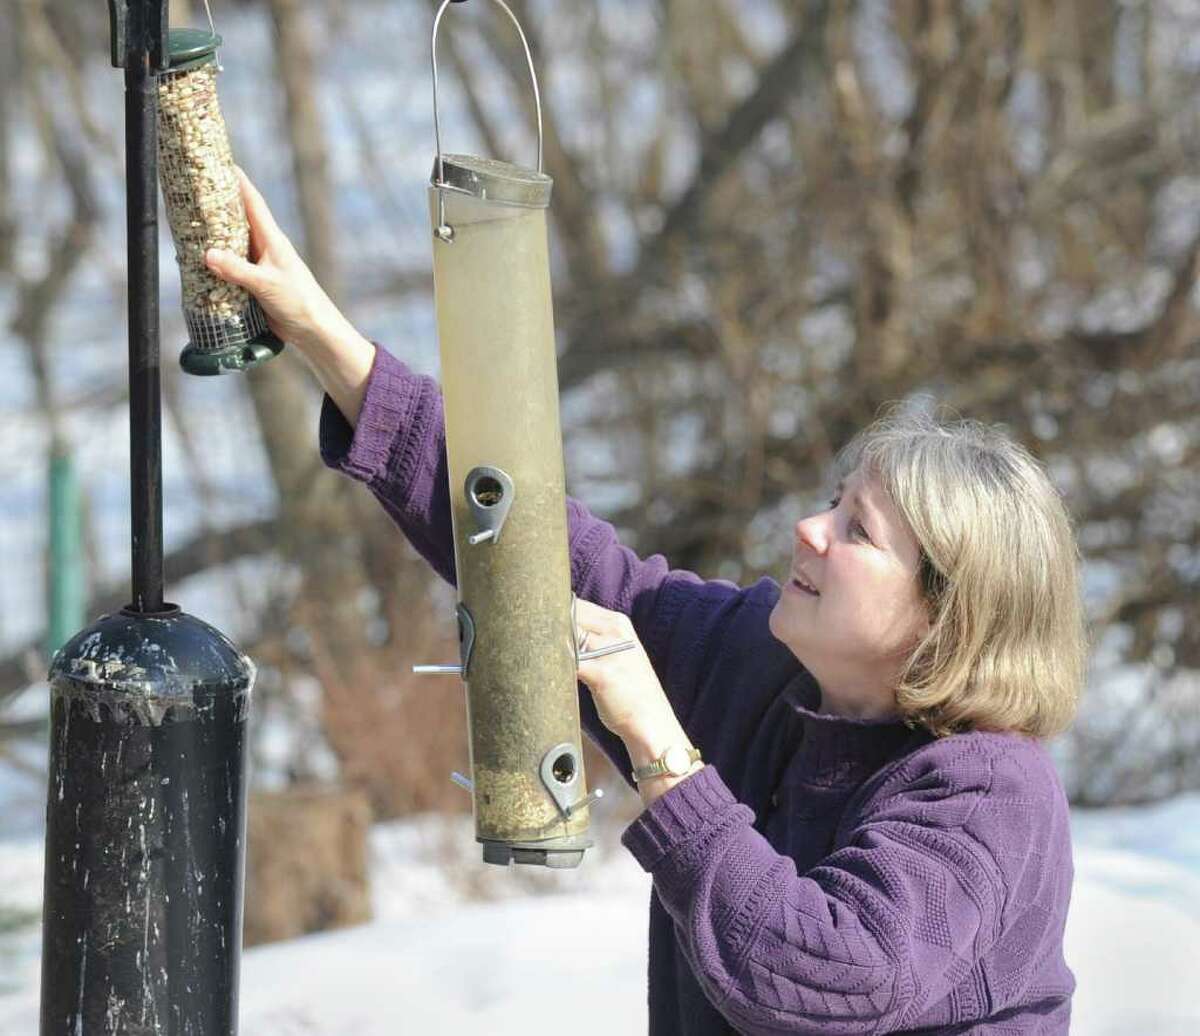 Cynthia Ehlinger of Riverside hangs a bird-feeder after filling it with food, in the backyard of her Riverside home, Thursday afternoon, Feb. 17, 2011. Ehlinger is preparaing for this weekend's Great Backyard Bird Count.